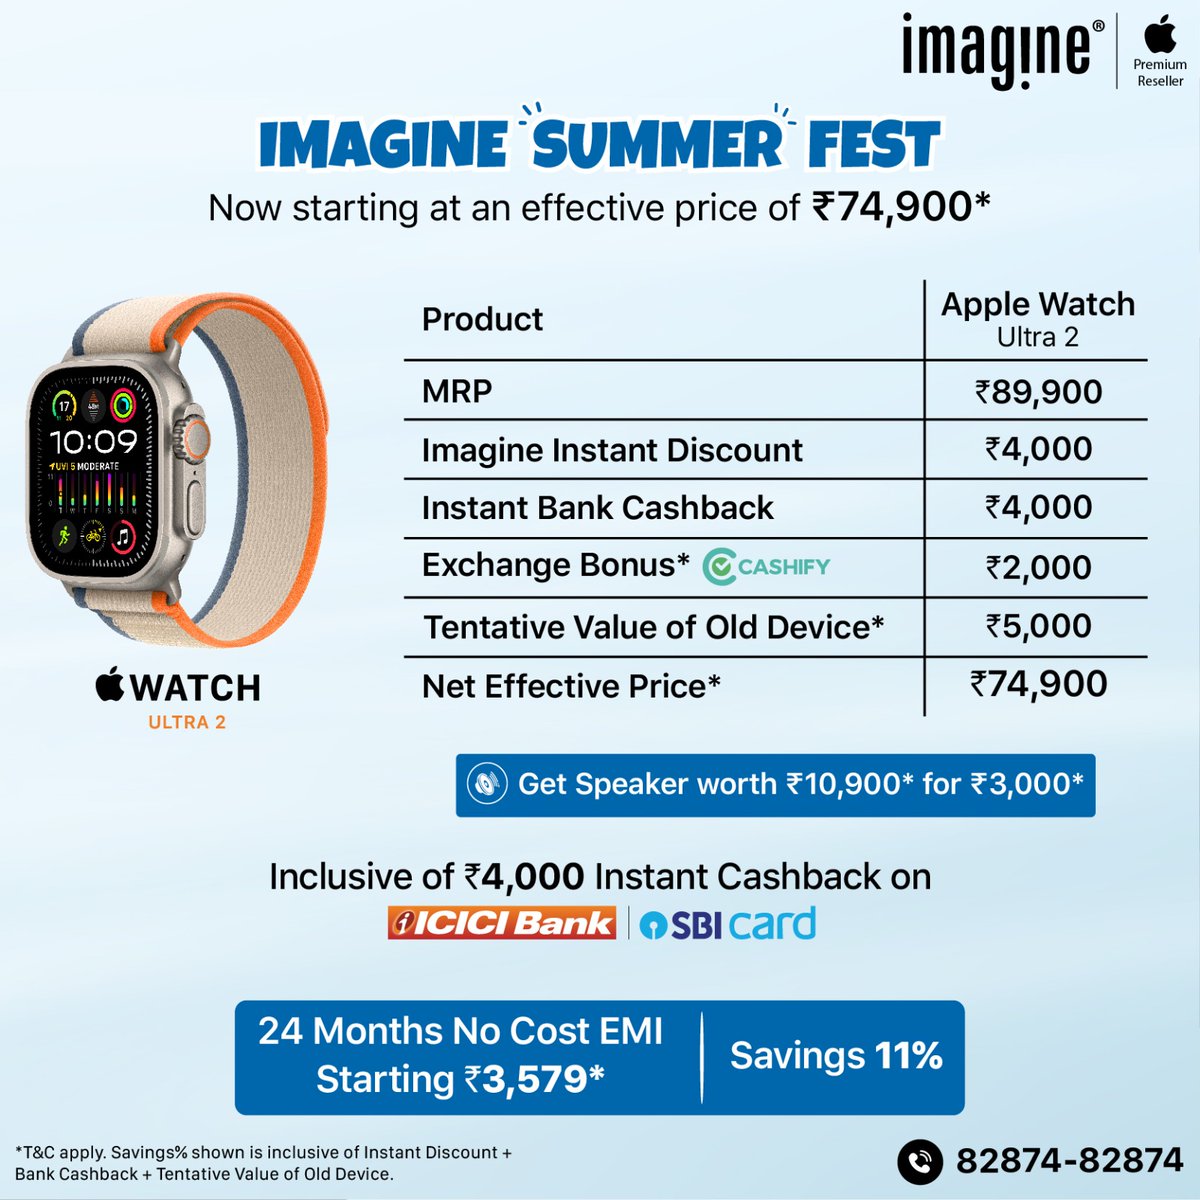 Celebrate Summer at Imagine: Exclusive Apple Deals Await! 🌞 Apple Watch starting at an effective price of ₹21,900* ✅ Upto ₹4,000* Instant Cashback on select banks ✅ Upto ₹4,000* Instant In-store discount ✅ Upto ₹2,000* Exchange bonus ✅ GST Invoice available ✅ Upto 24